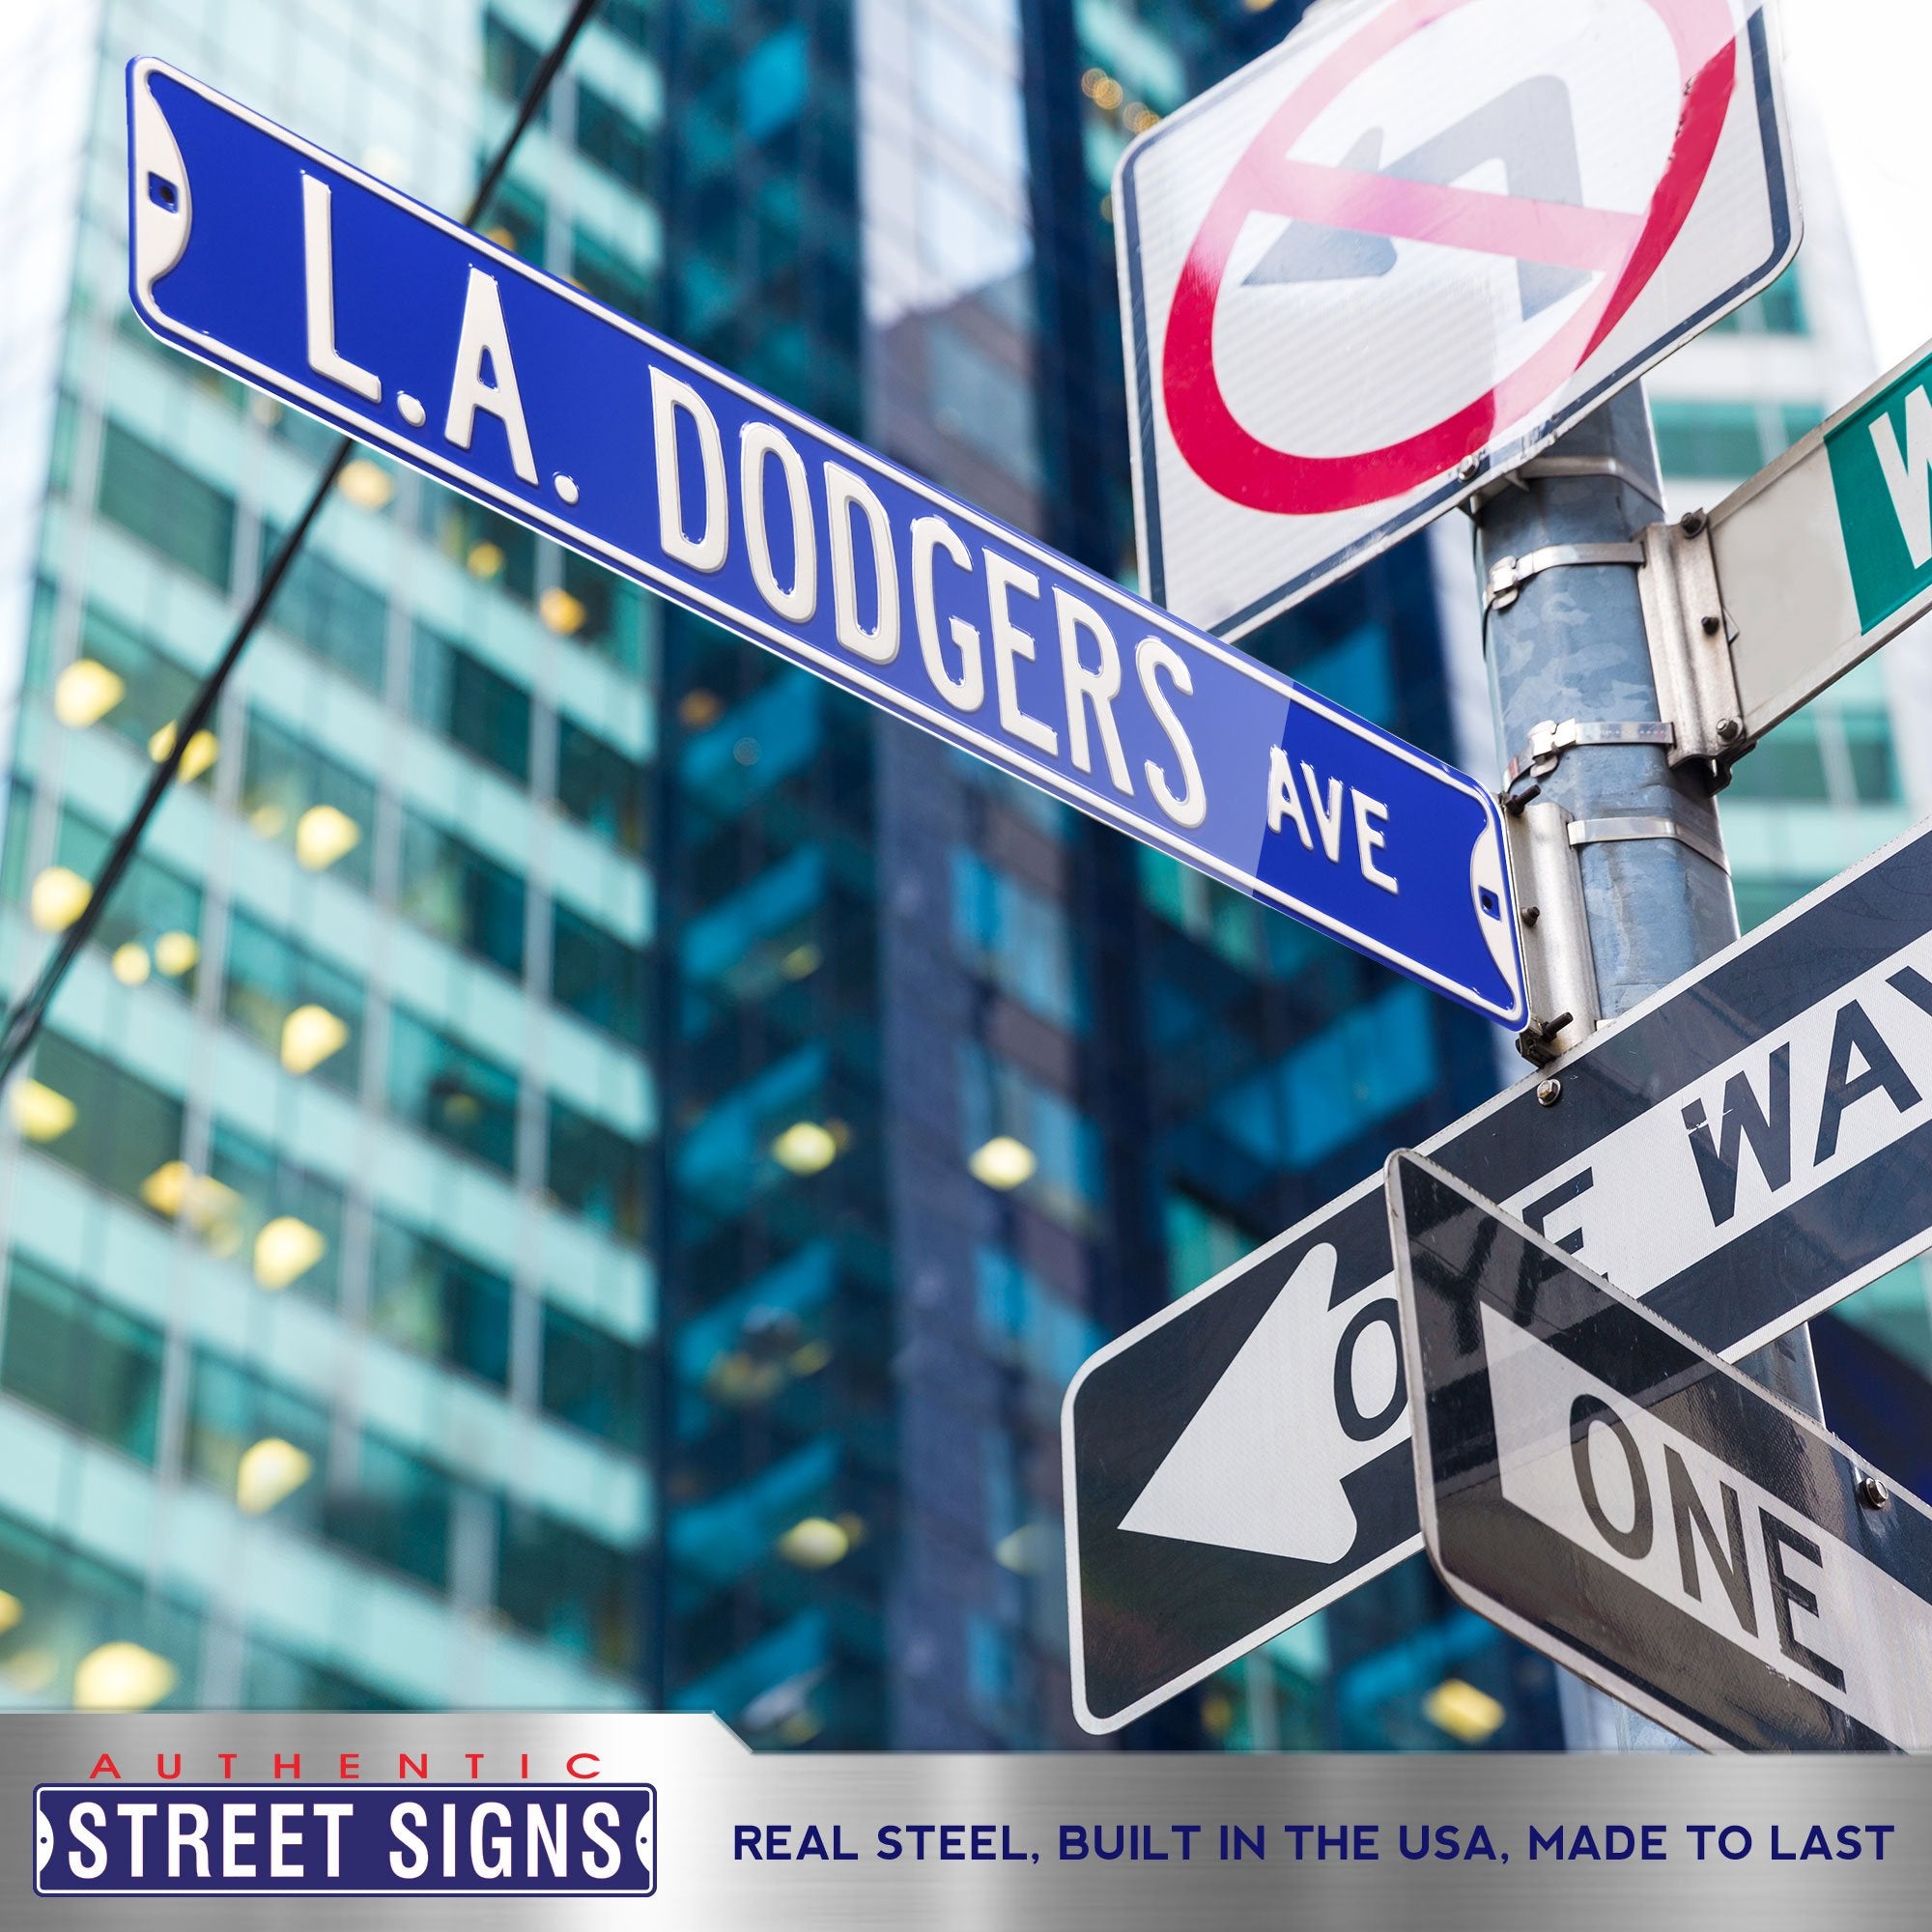 Los Angeles Dodgers Steel Street Sign-L.A. DODGERS AVE 36" W x 6" H by Fathead